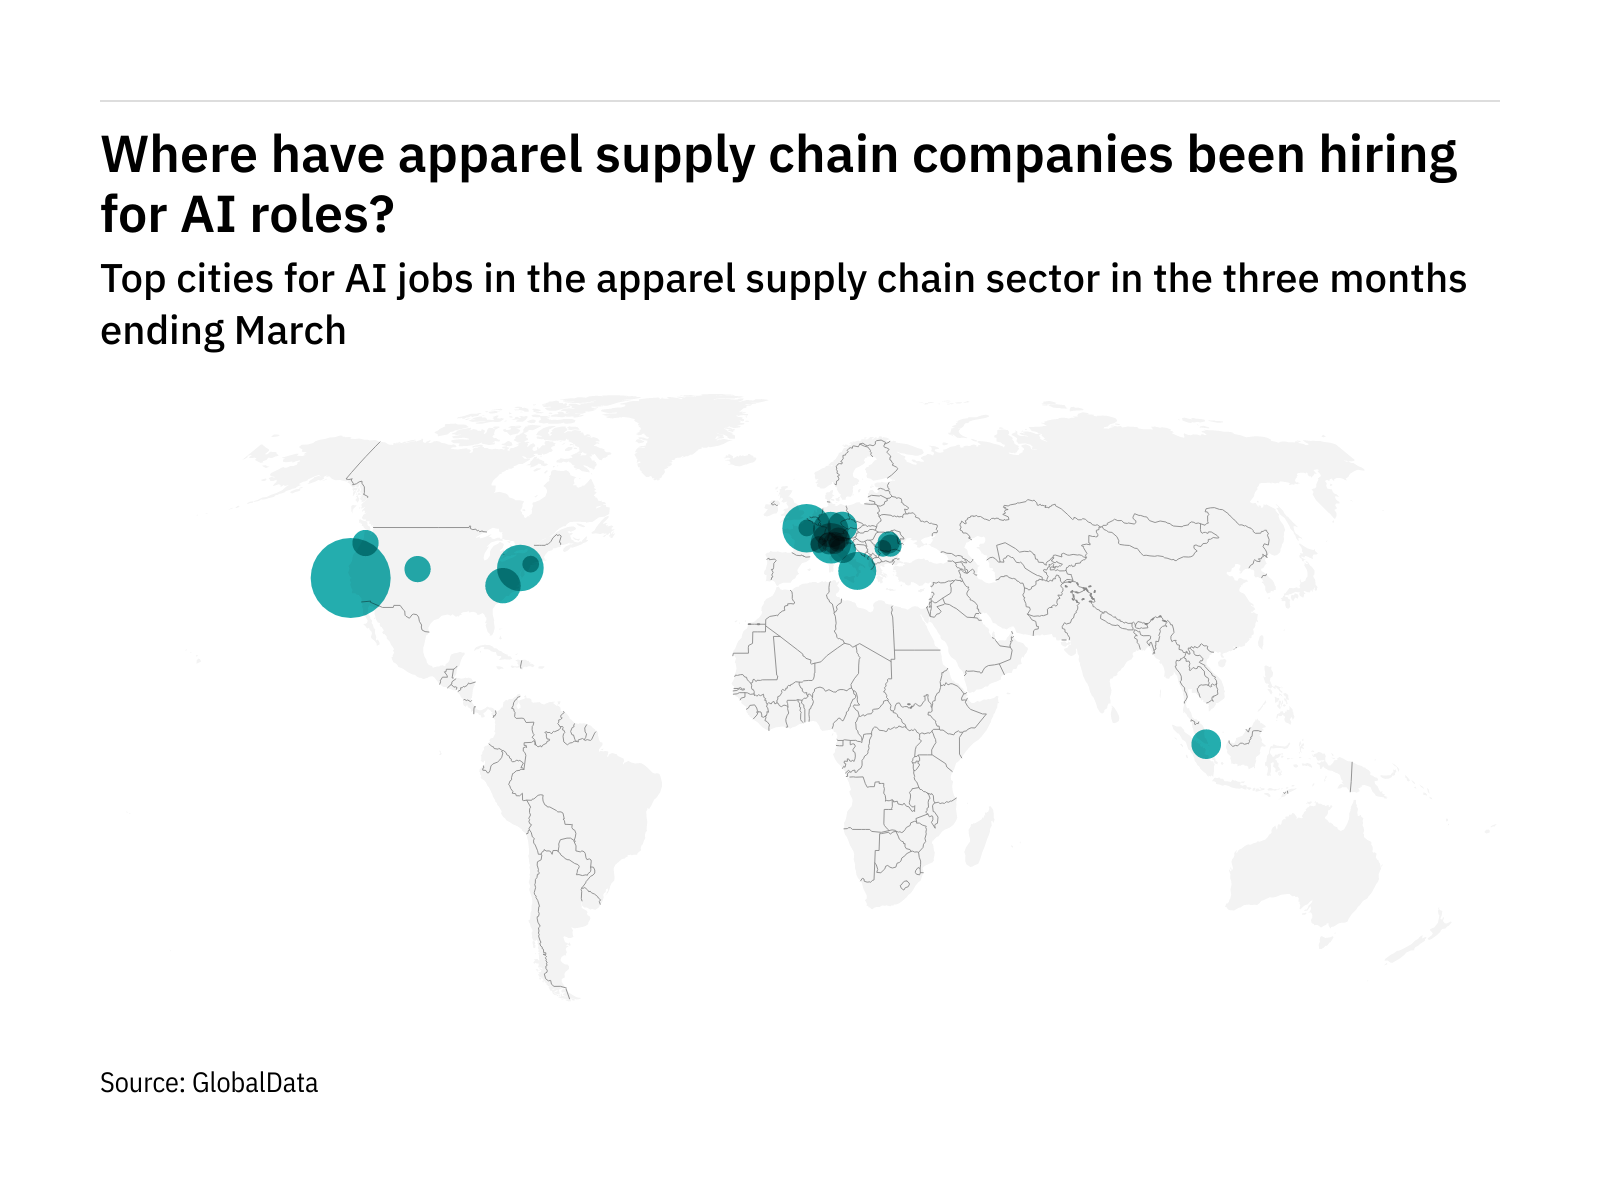 Europe sees hiring boom in apparel industry AI roles